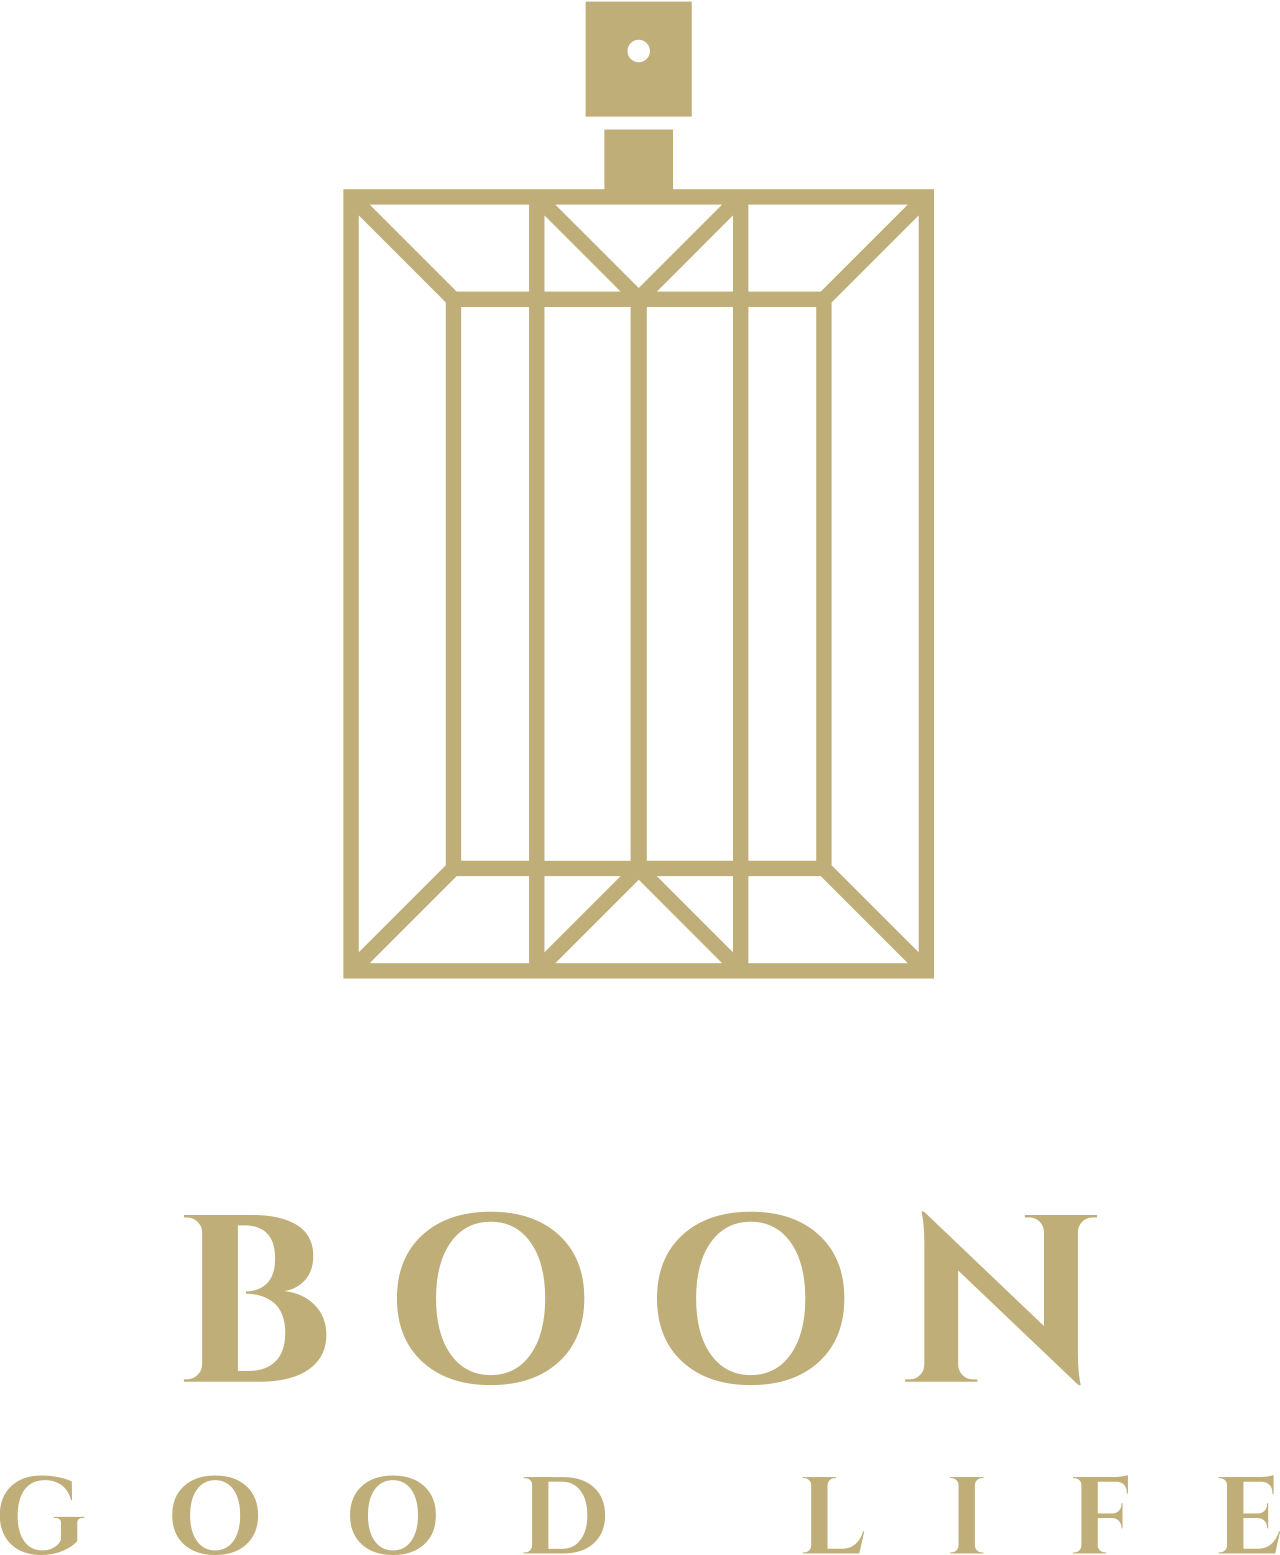 BOON's web page